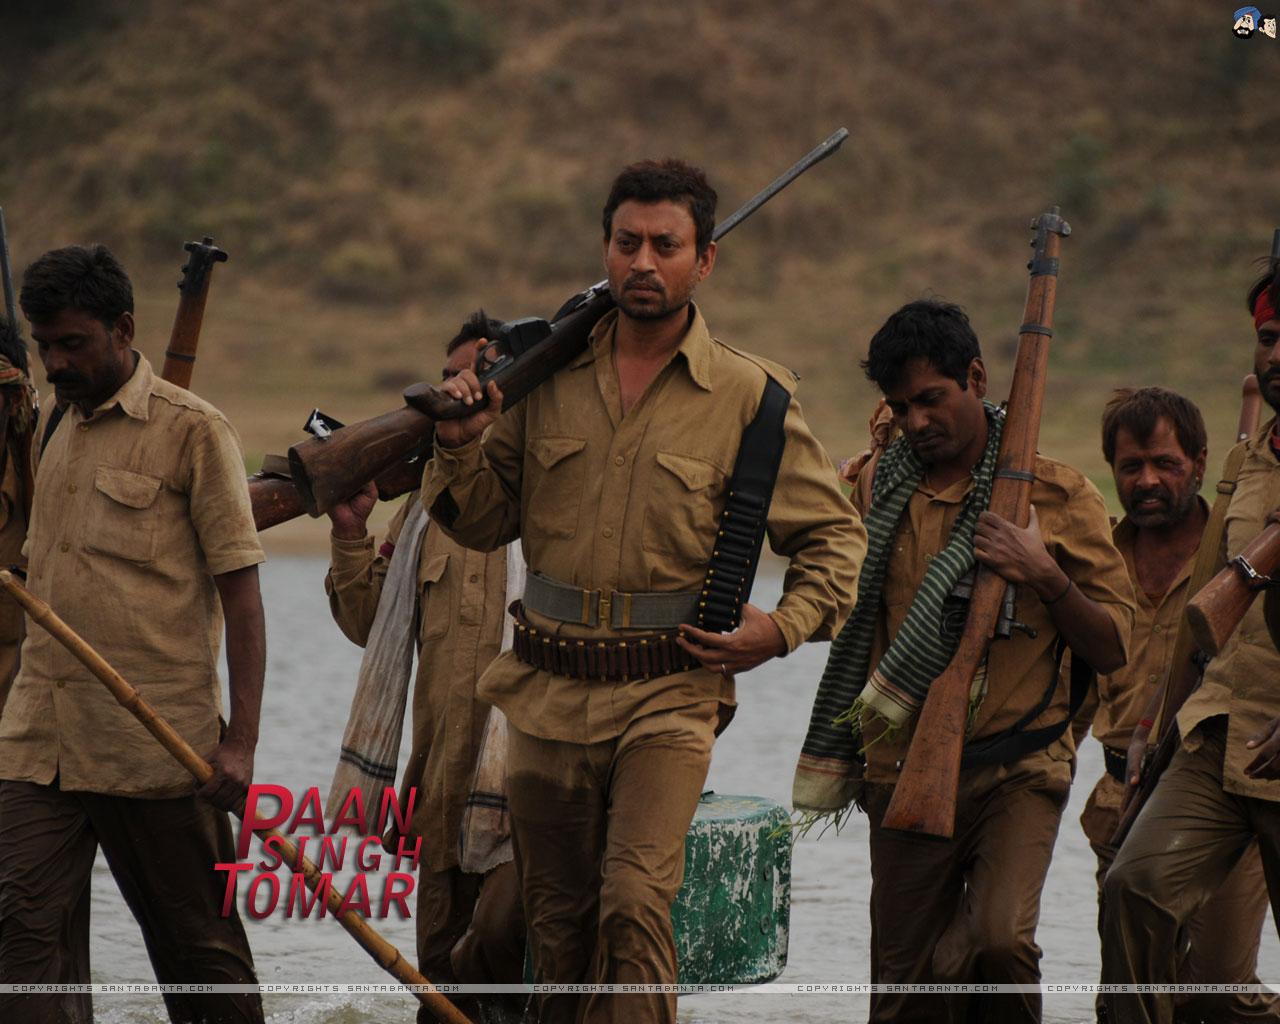 Paan Singh Tomar: The film was based on the story of Indian soldier Paan Singh Tomar, who was an athlete, who turned into a rebel. The protagonist was played by Irrfan Khan.